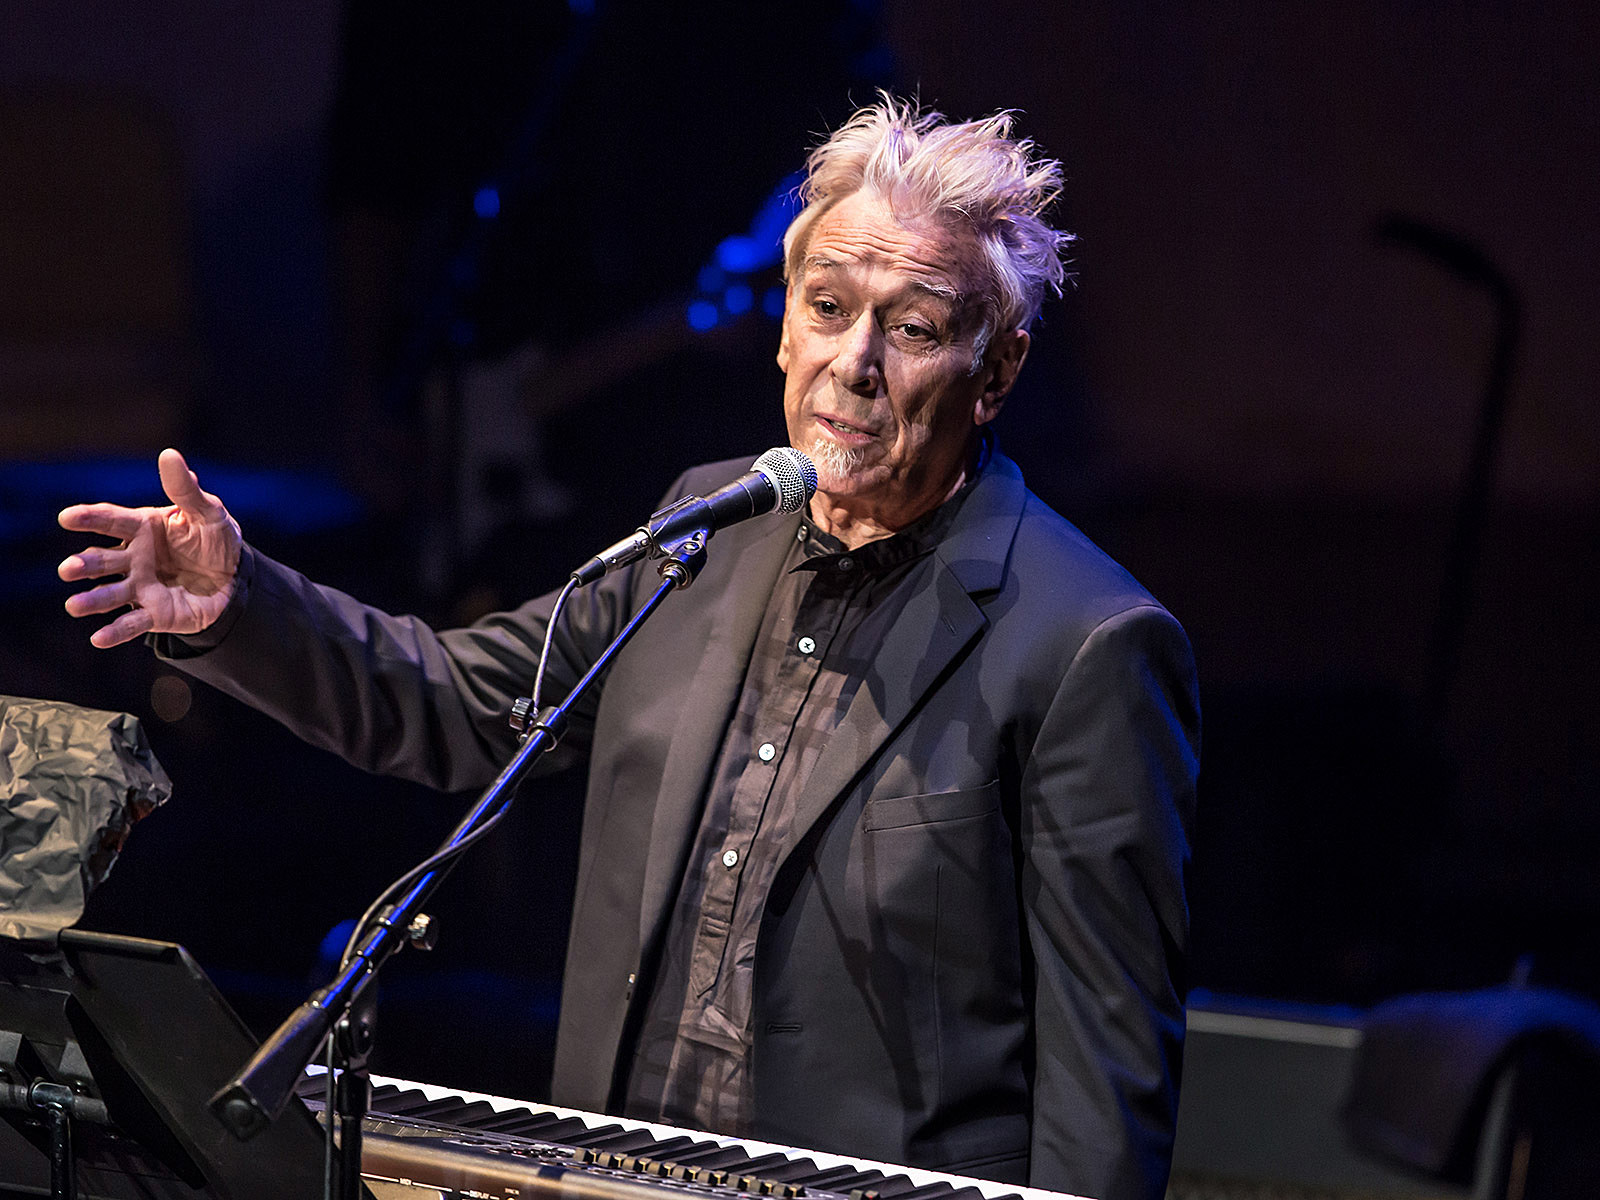 John Cale: The Velvet Underground and Nico at Brooklyn Academy of Music